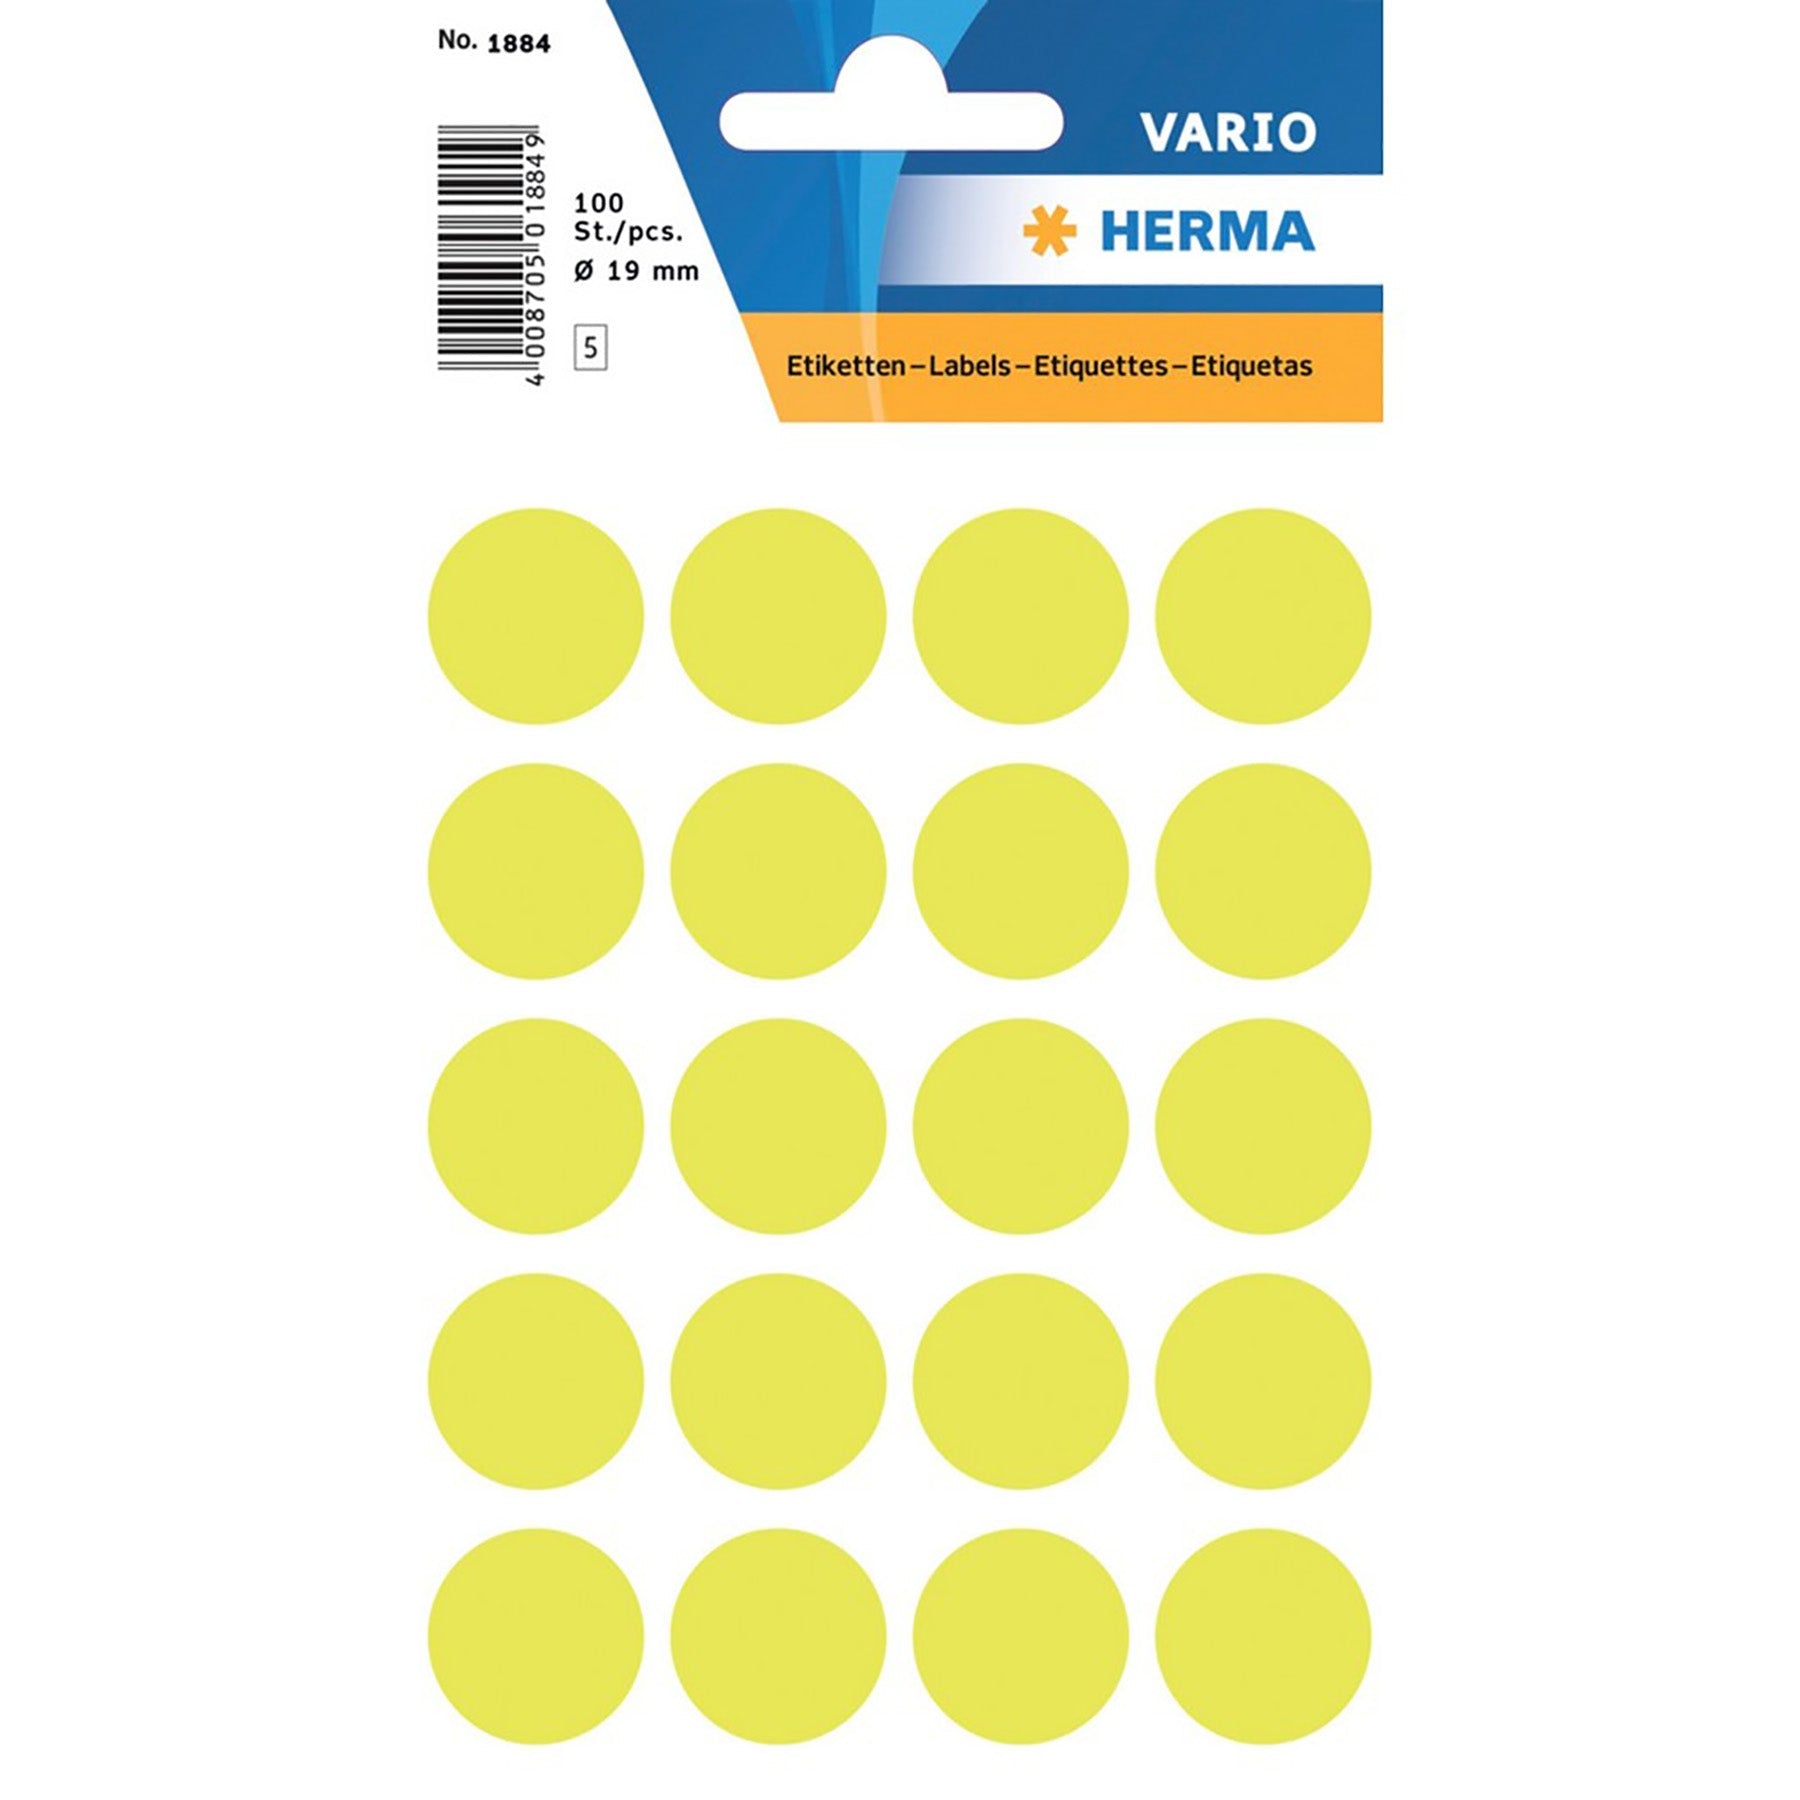 Herma Vario 5 Sheets Colour-Coding Round Labels Dots, Fluo Yellow 0.75in